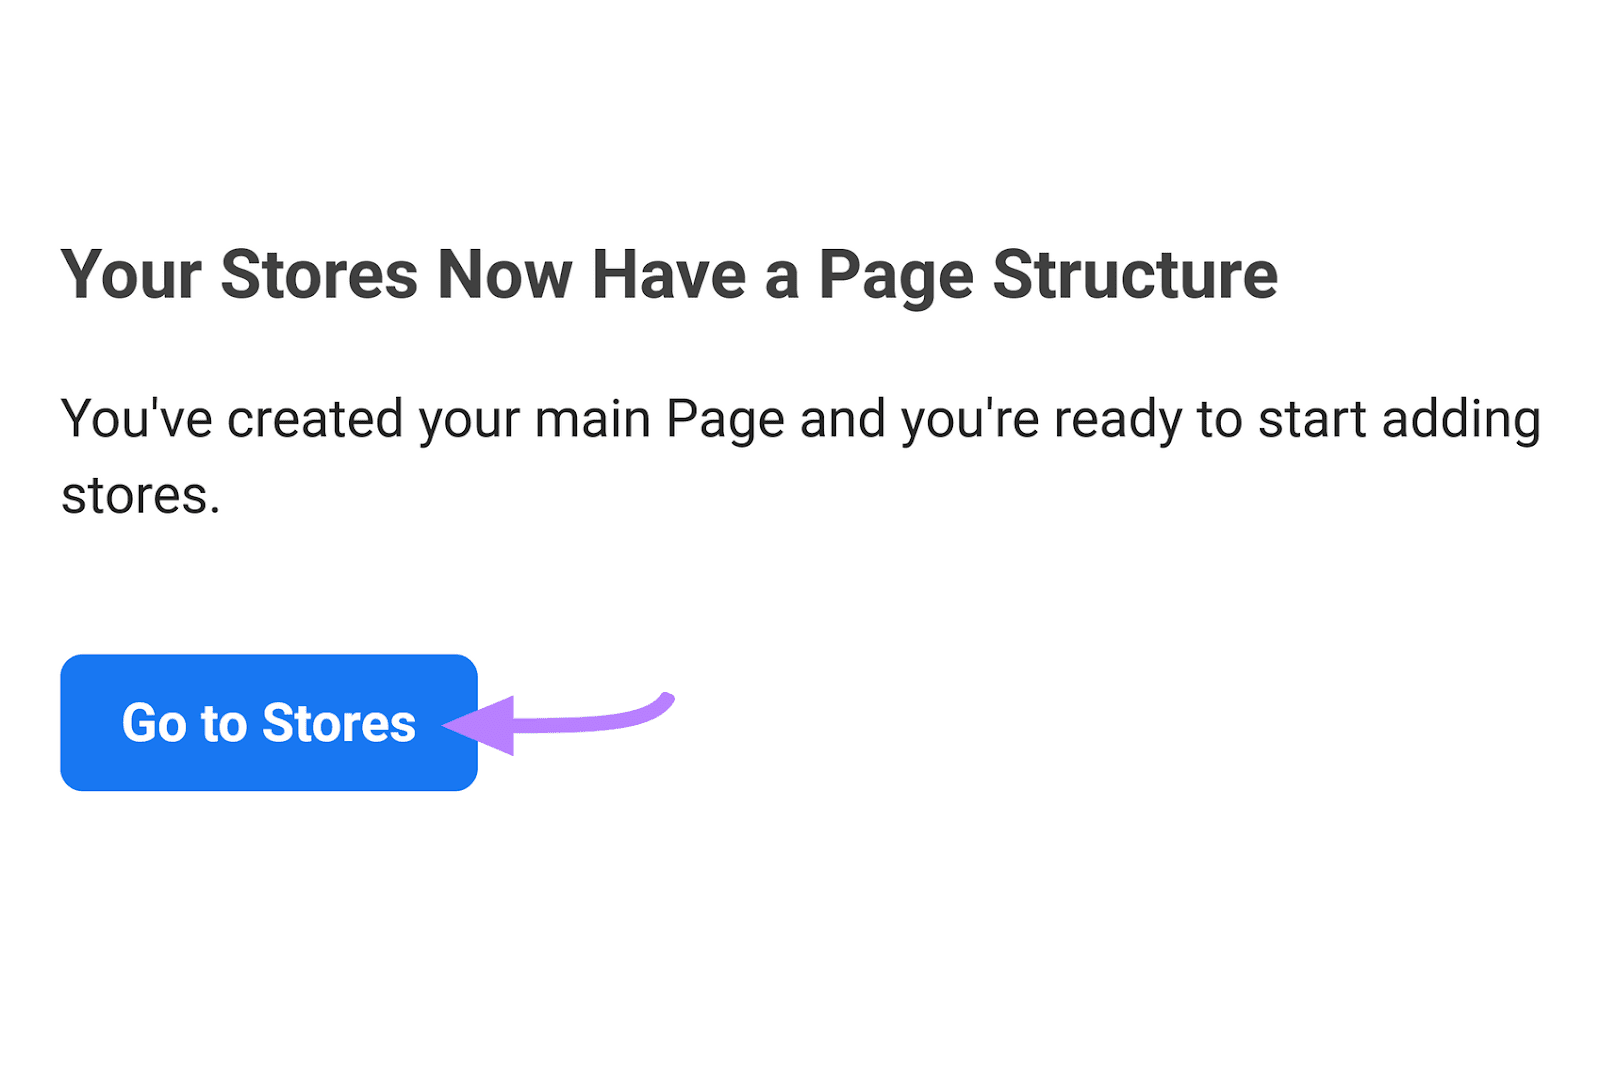 "Go to Stores" button highlighted under the message that reads "Your Stores Now Have a Page Structure"